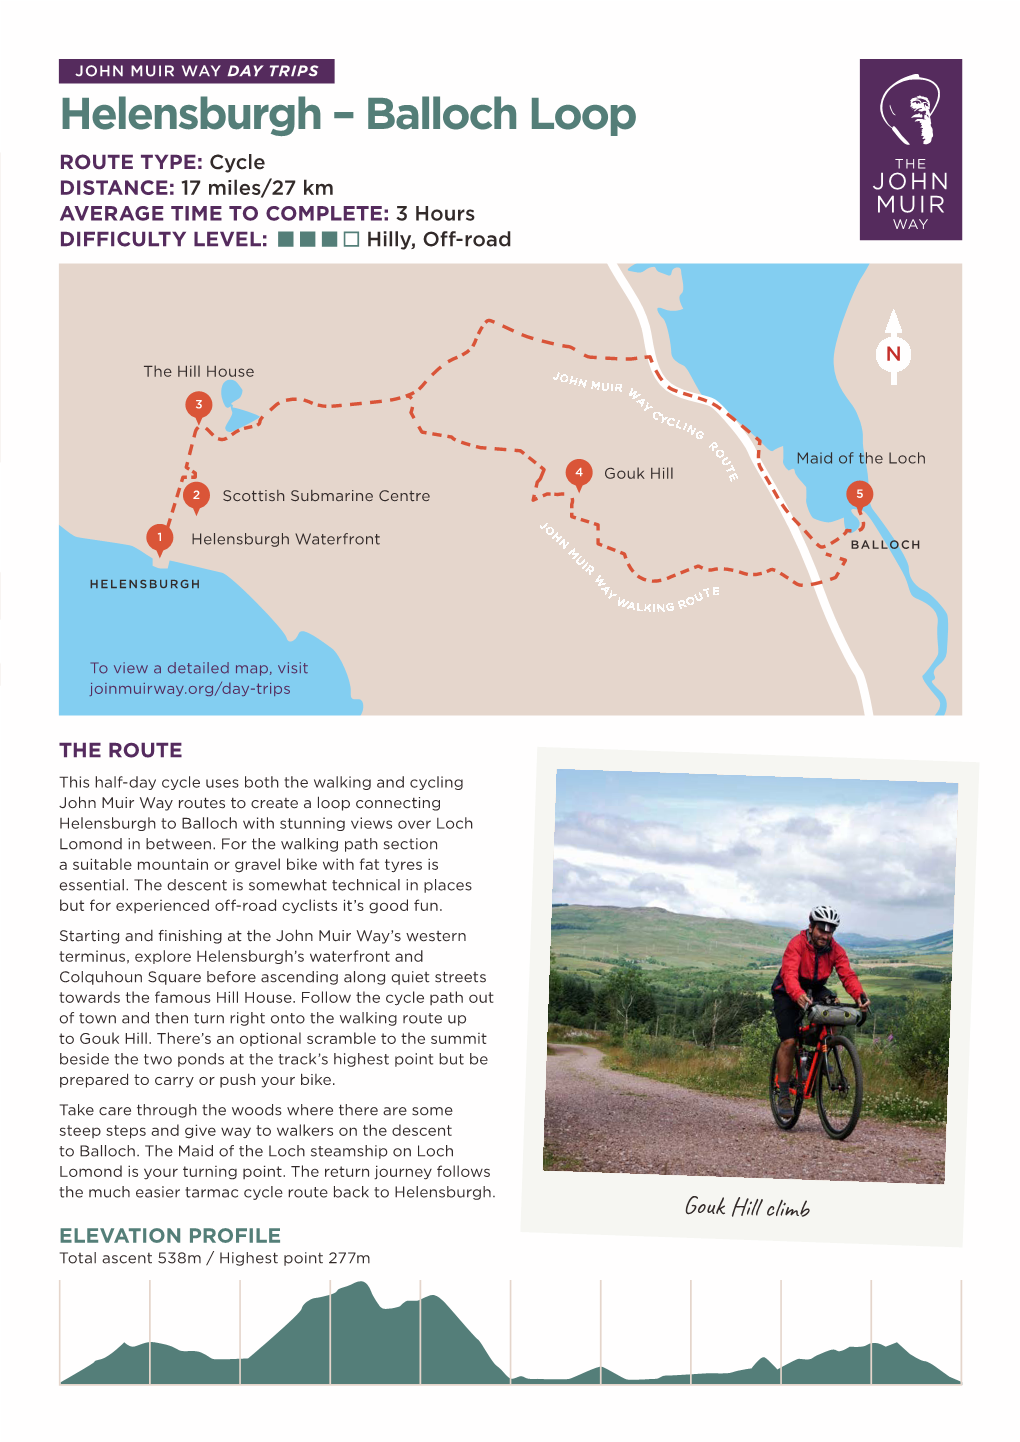 Helensburgh – Balloch Loop ROUTE TYPE: Cycle DISTANCE: 17 Miles/27 Km AVERAGE TIME to COMPLETE: 3 Hours DIFFICULTY LEVEL: Hilly, Off-Road